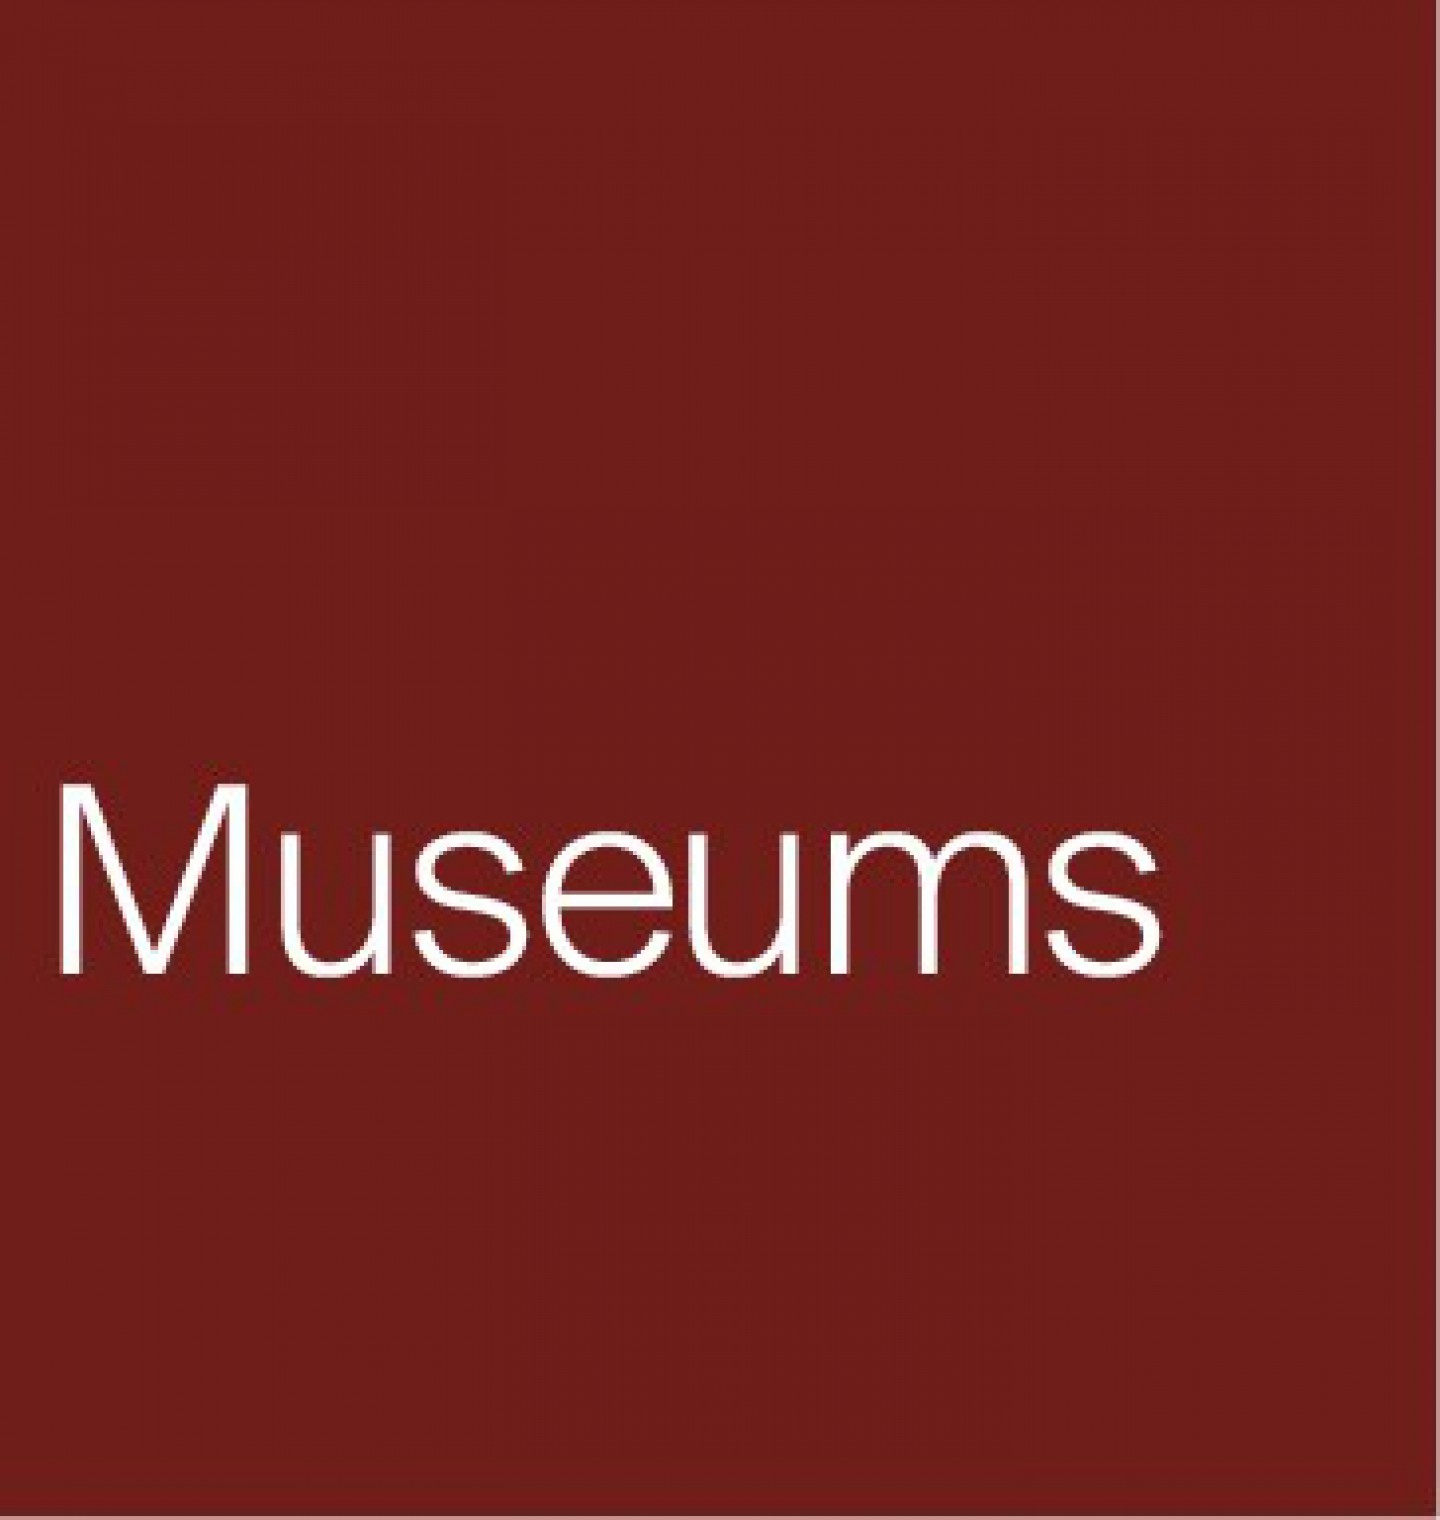  View all museum projects